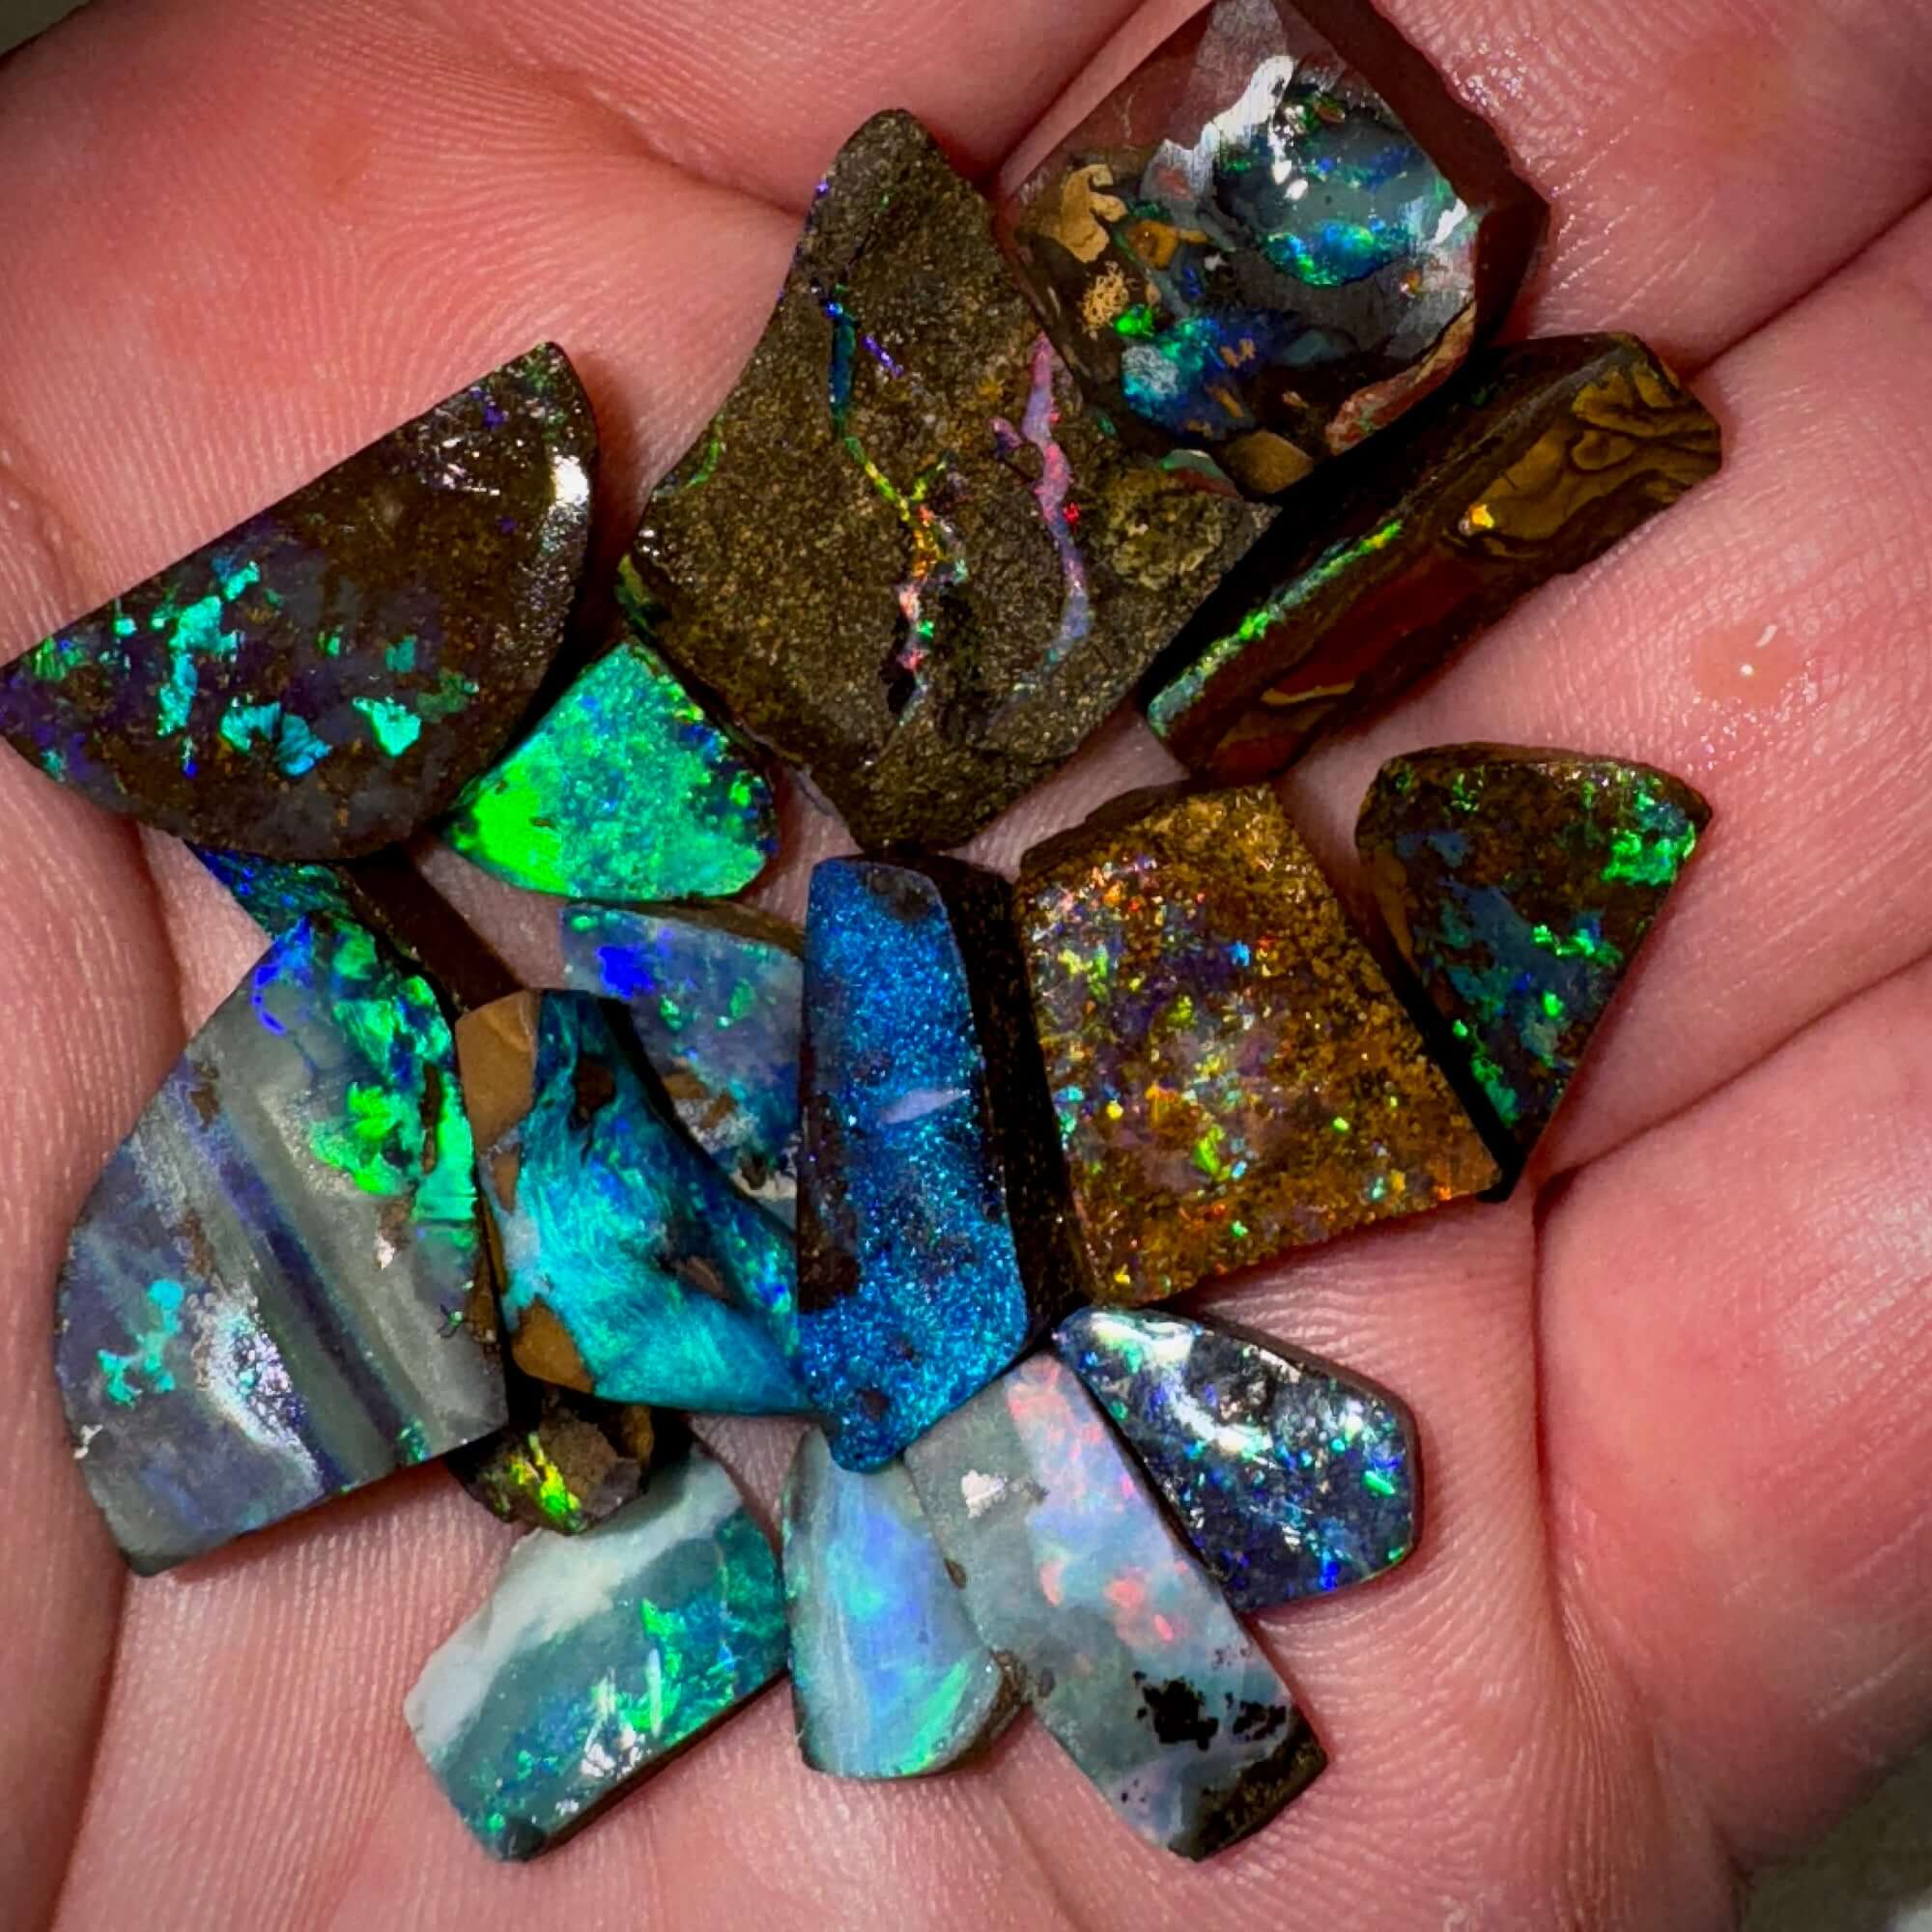 Opal collections